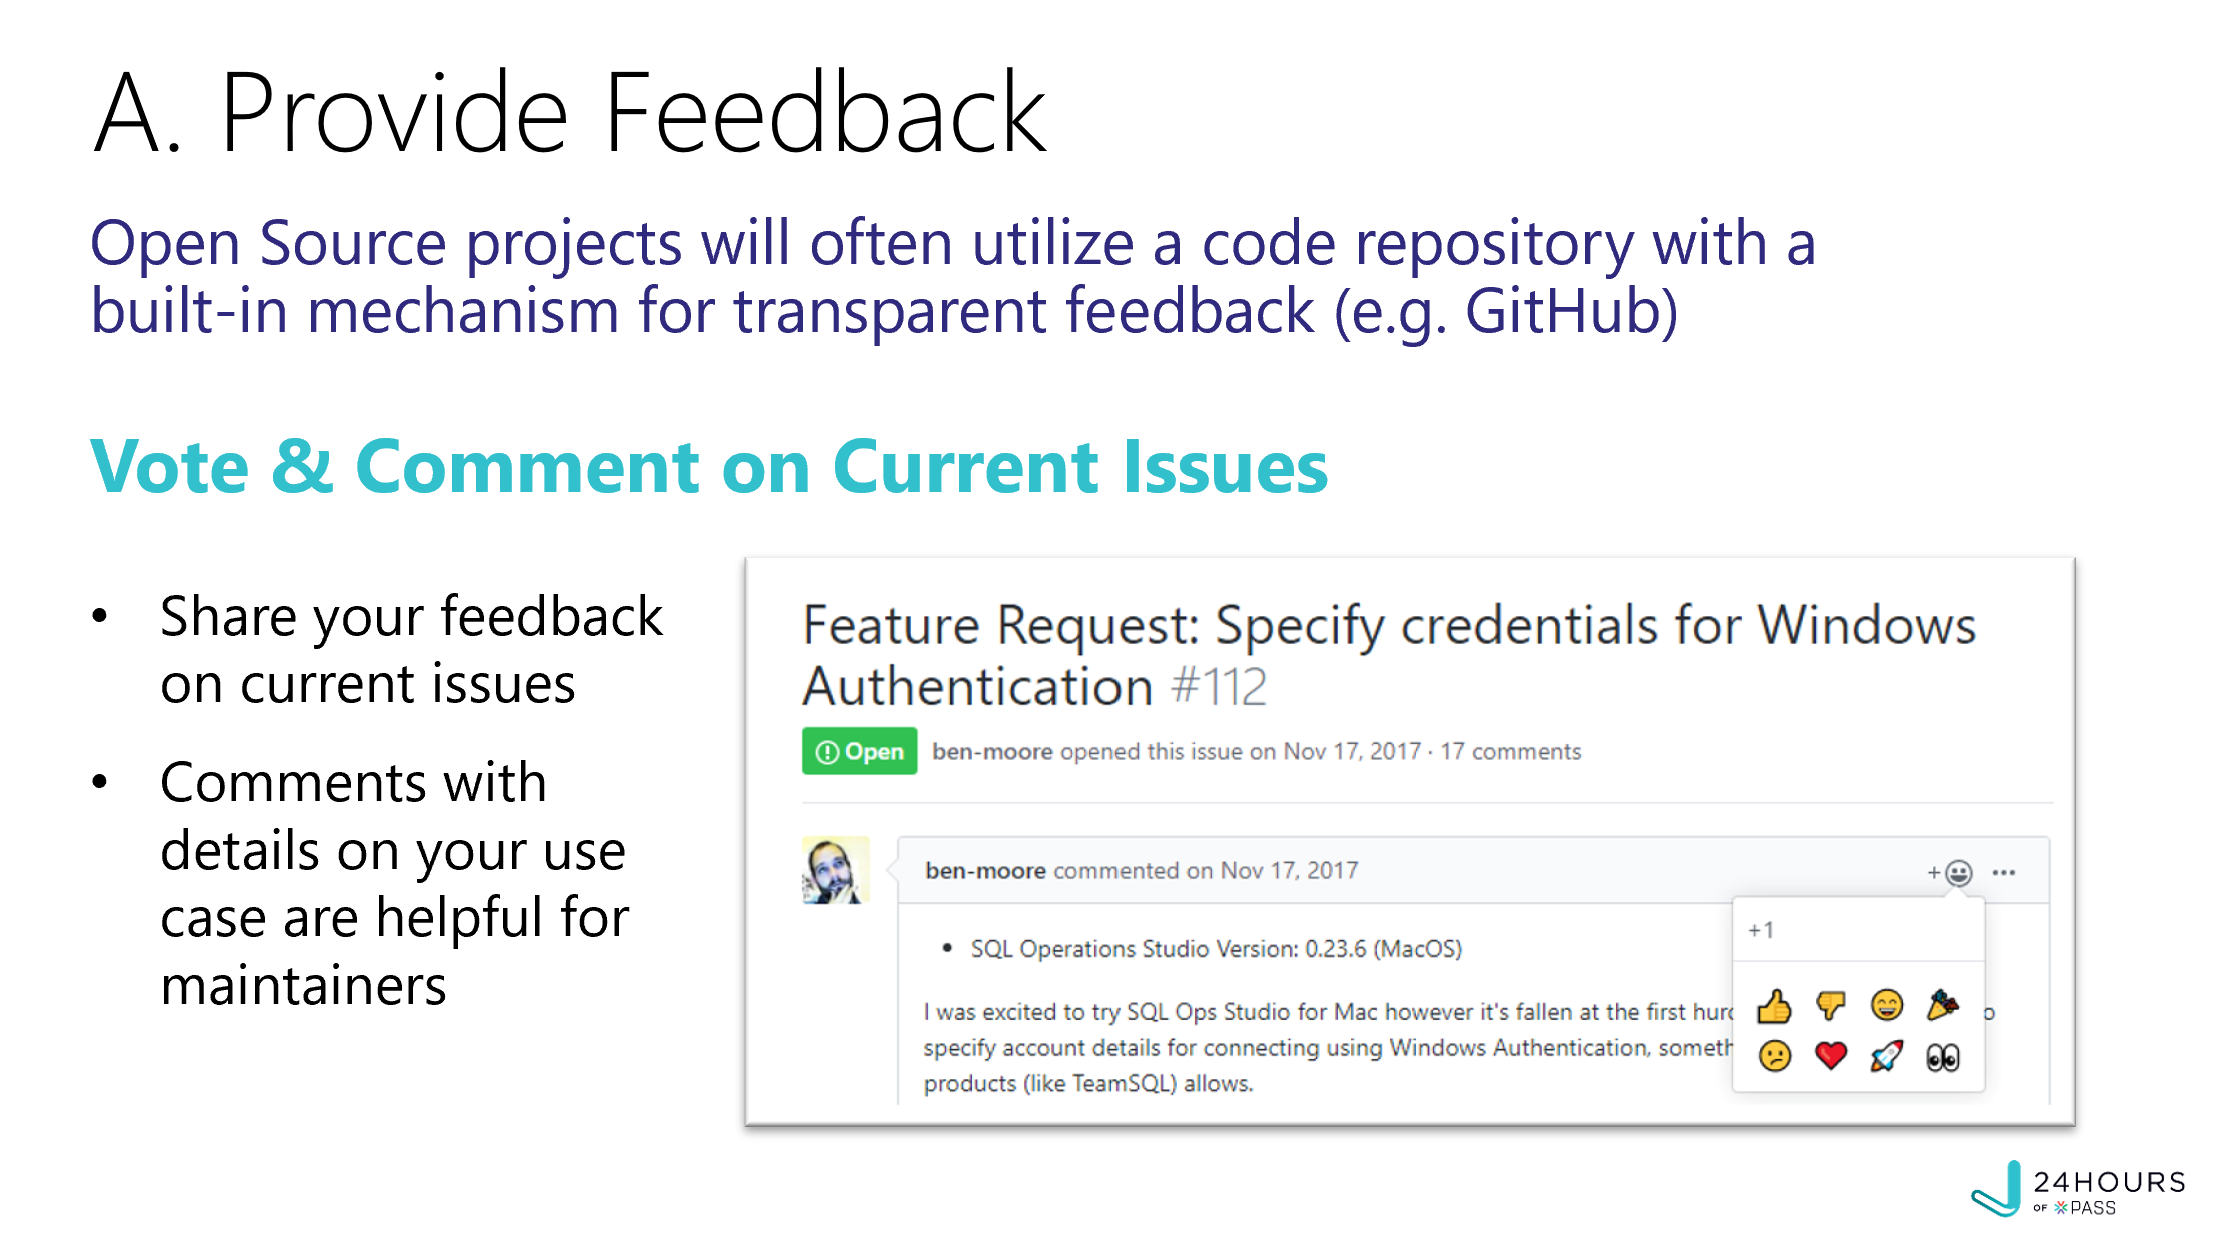 Provide feedback
Open source projects will often utilize a code repository with a built in mechanism for feedback